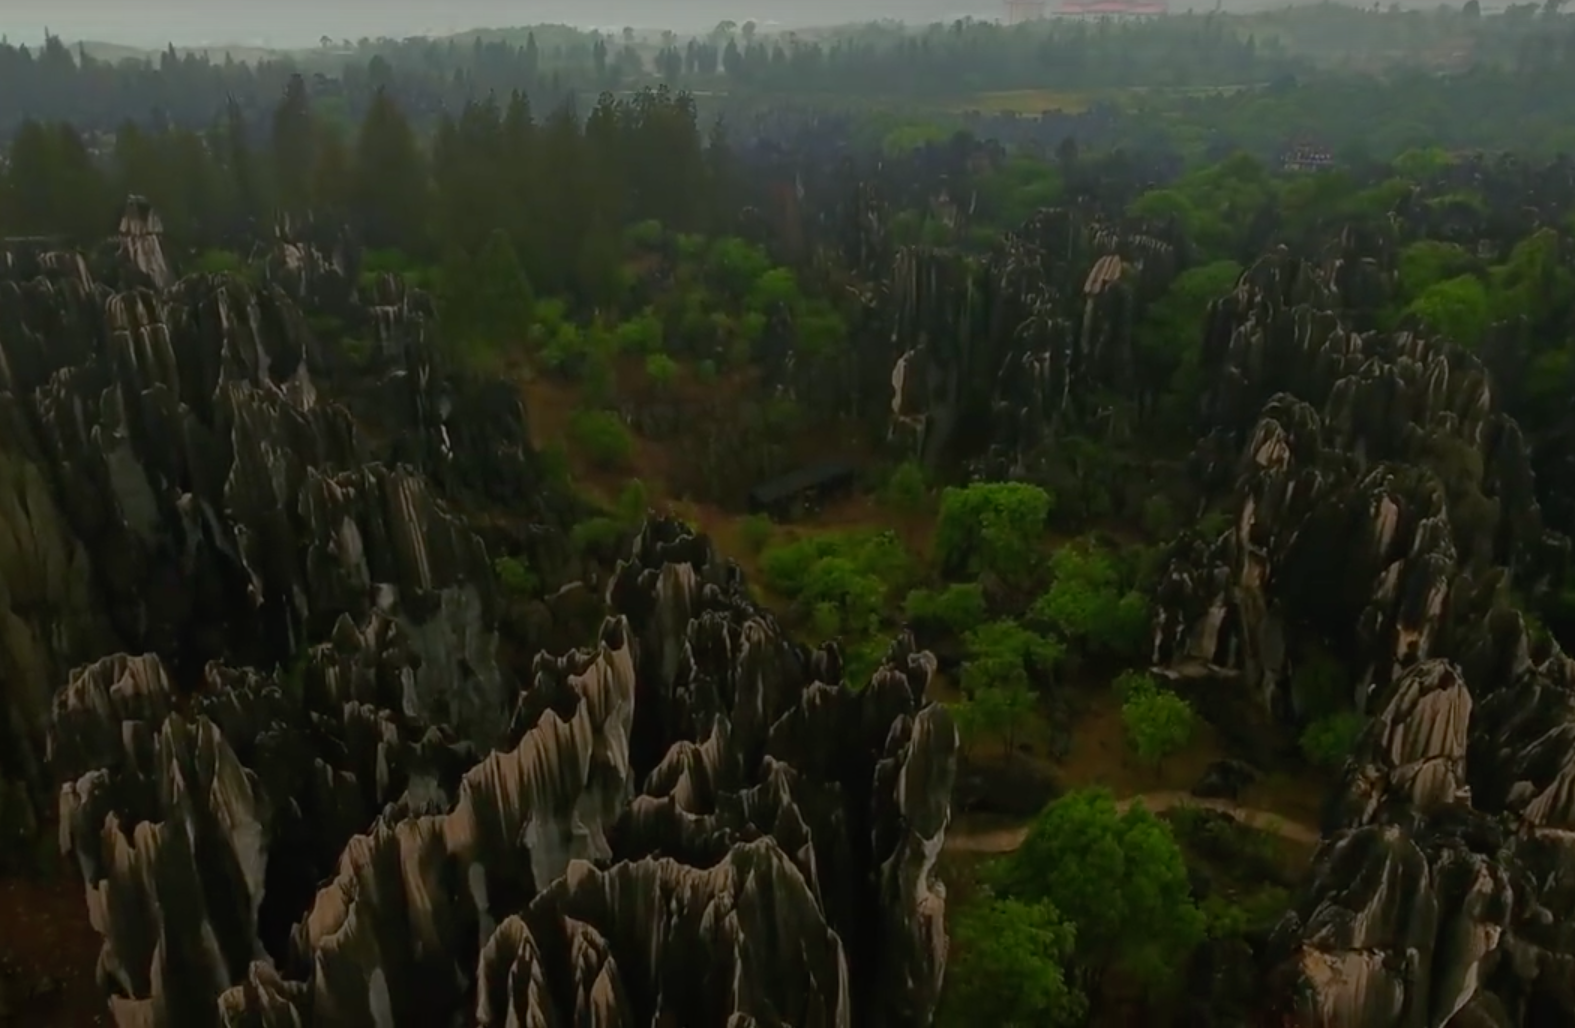 The Mysterious Stone Forest